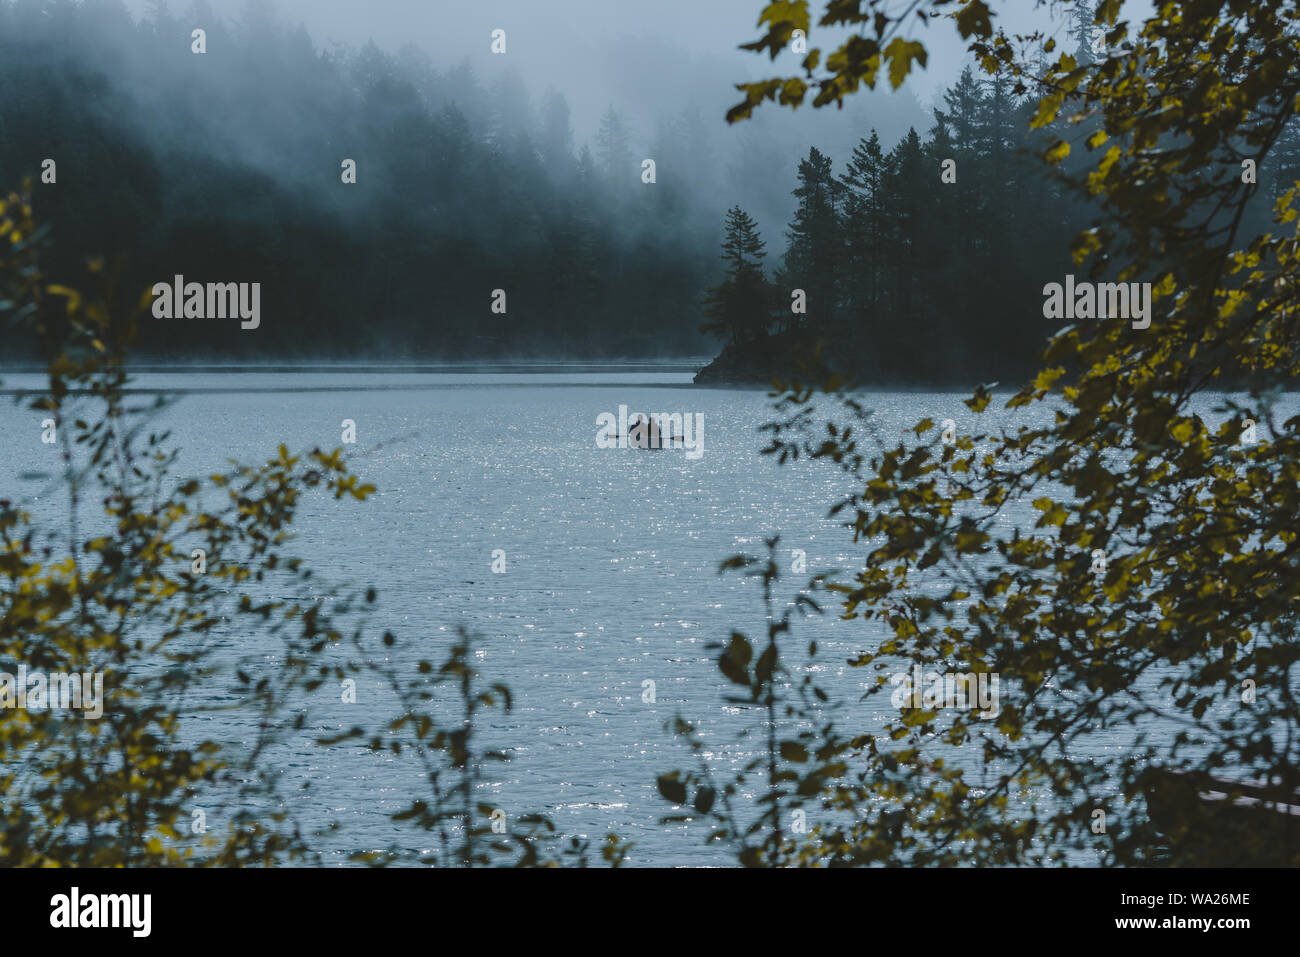 Early morning canoe row on the foggy forest lakes of Orcas Island, Washington State, Pacific Northwest Stock Photo